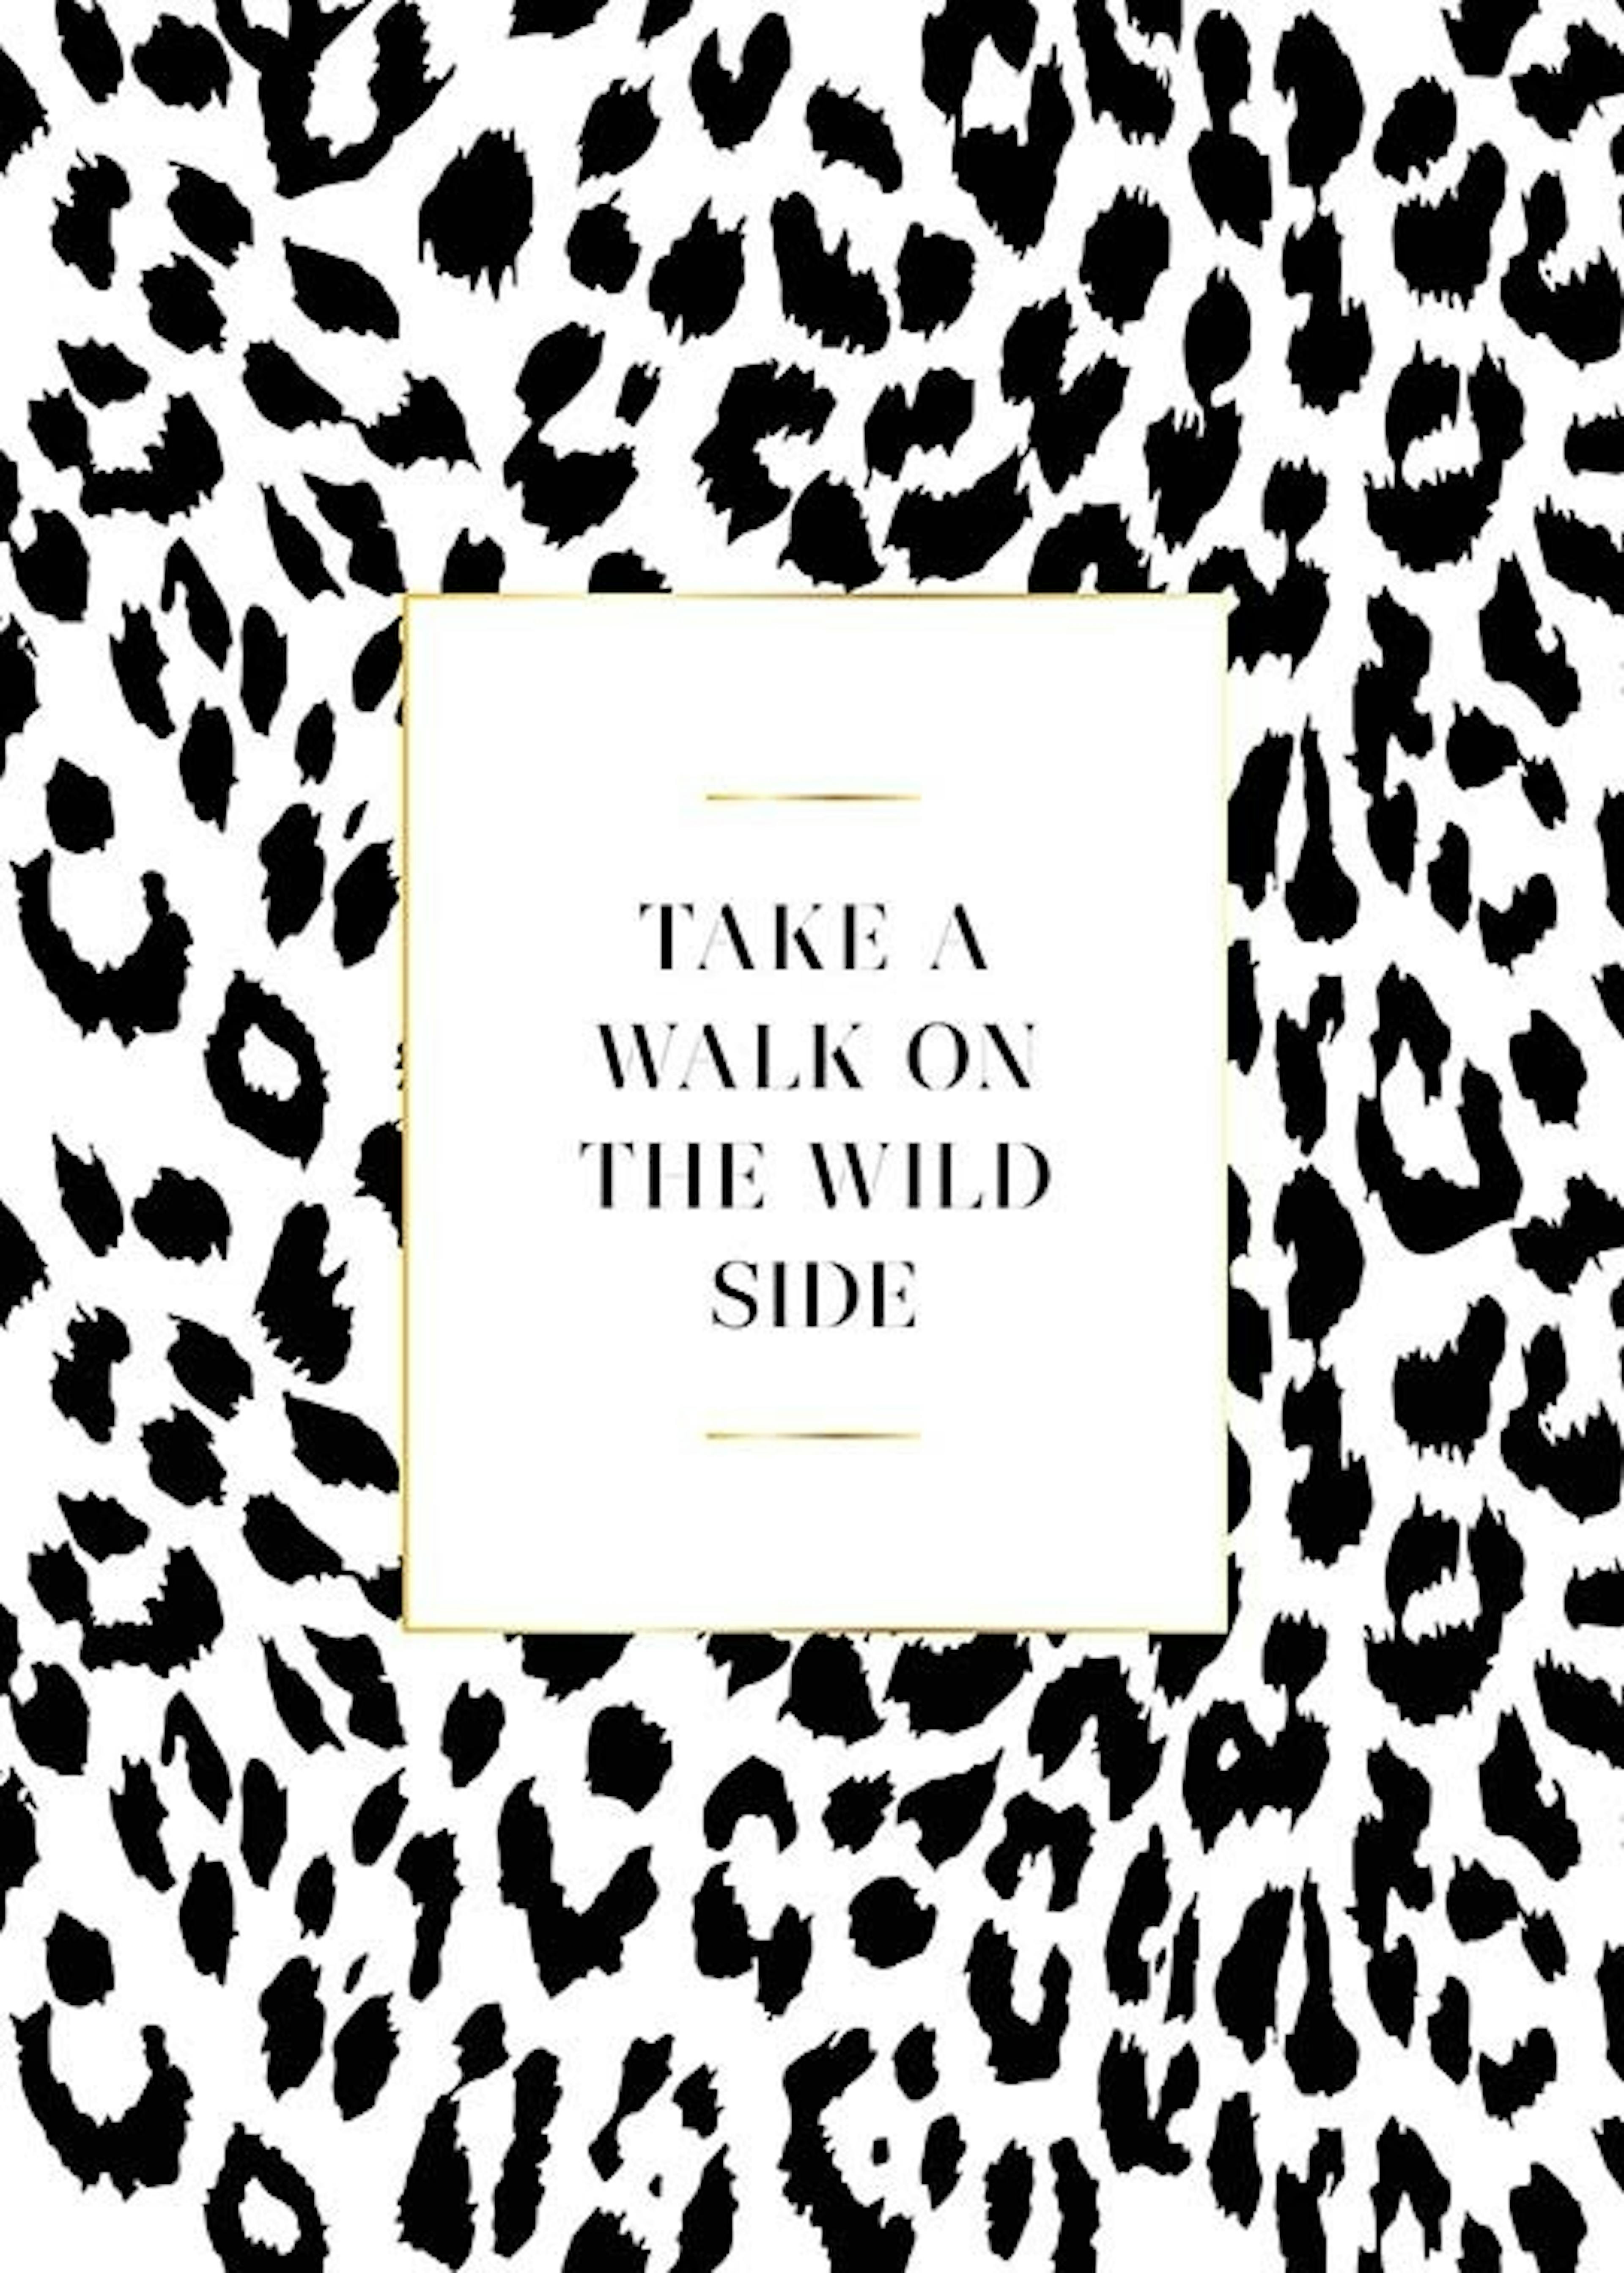 On The Wild Side Print 0